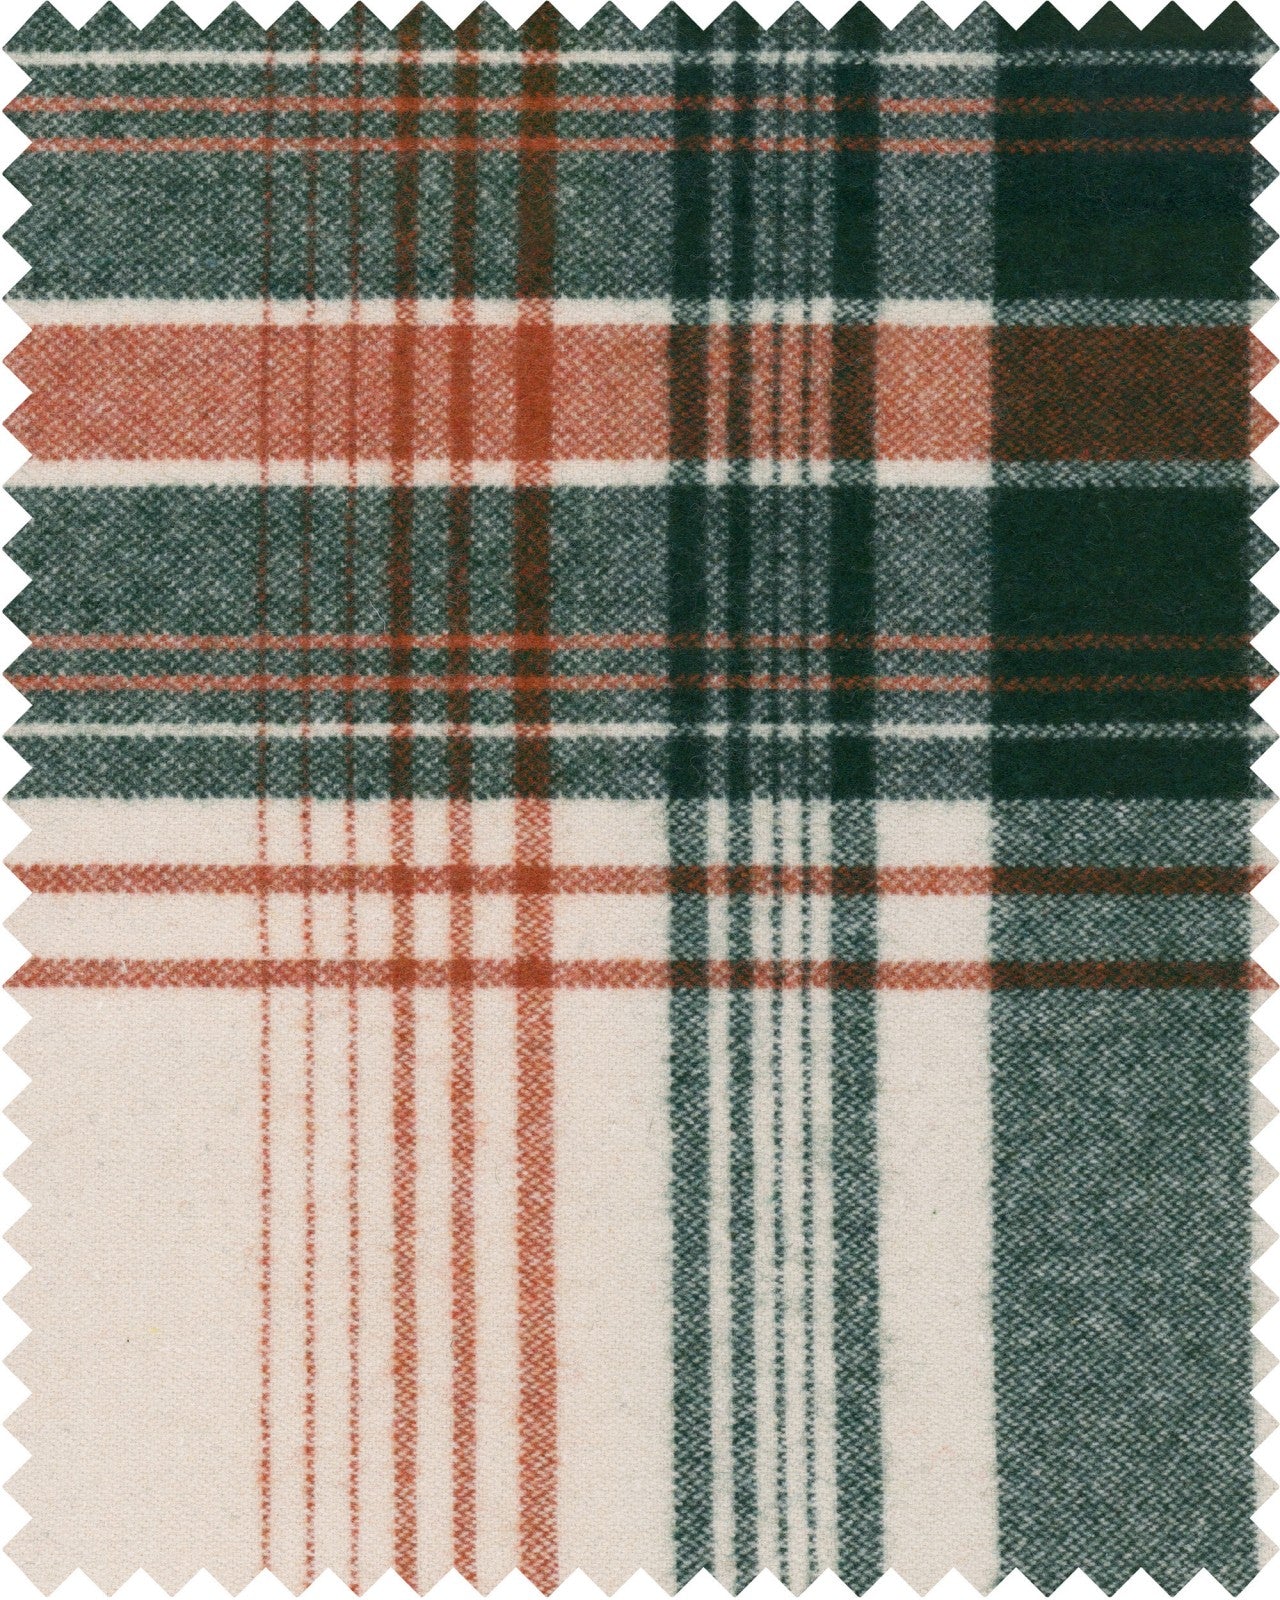 Monterey Plaid fabric in terracotta color - pattern number FB00089 - by Mind The Gap in the Woodstock collection